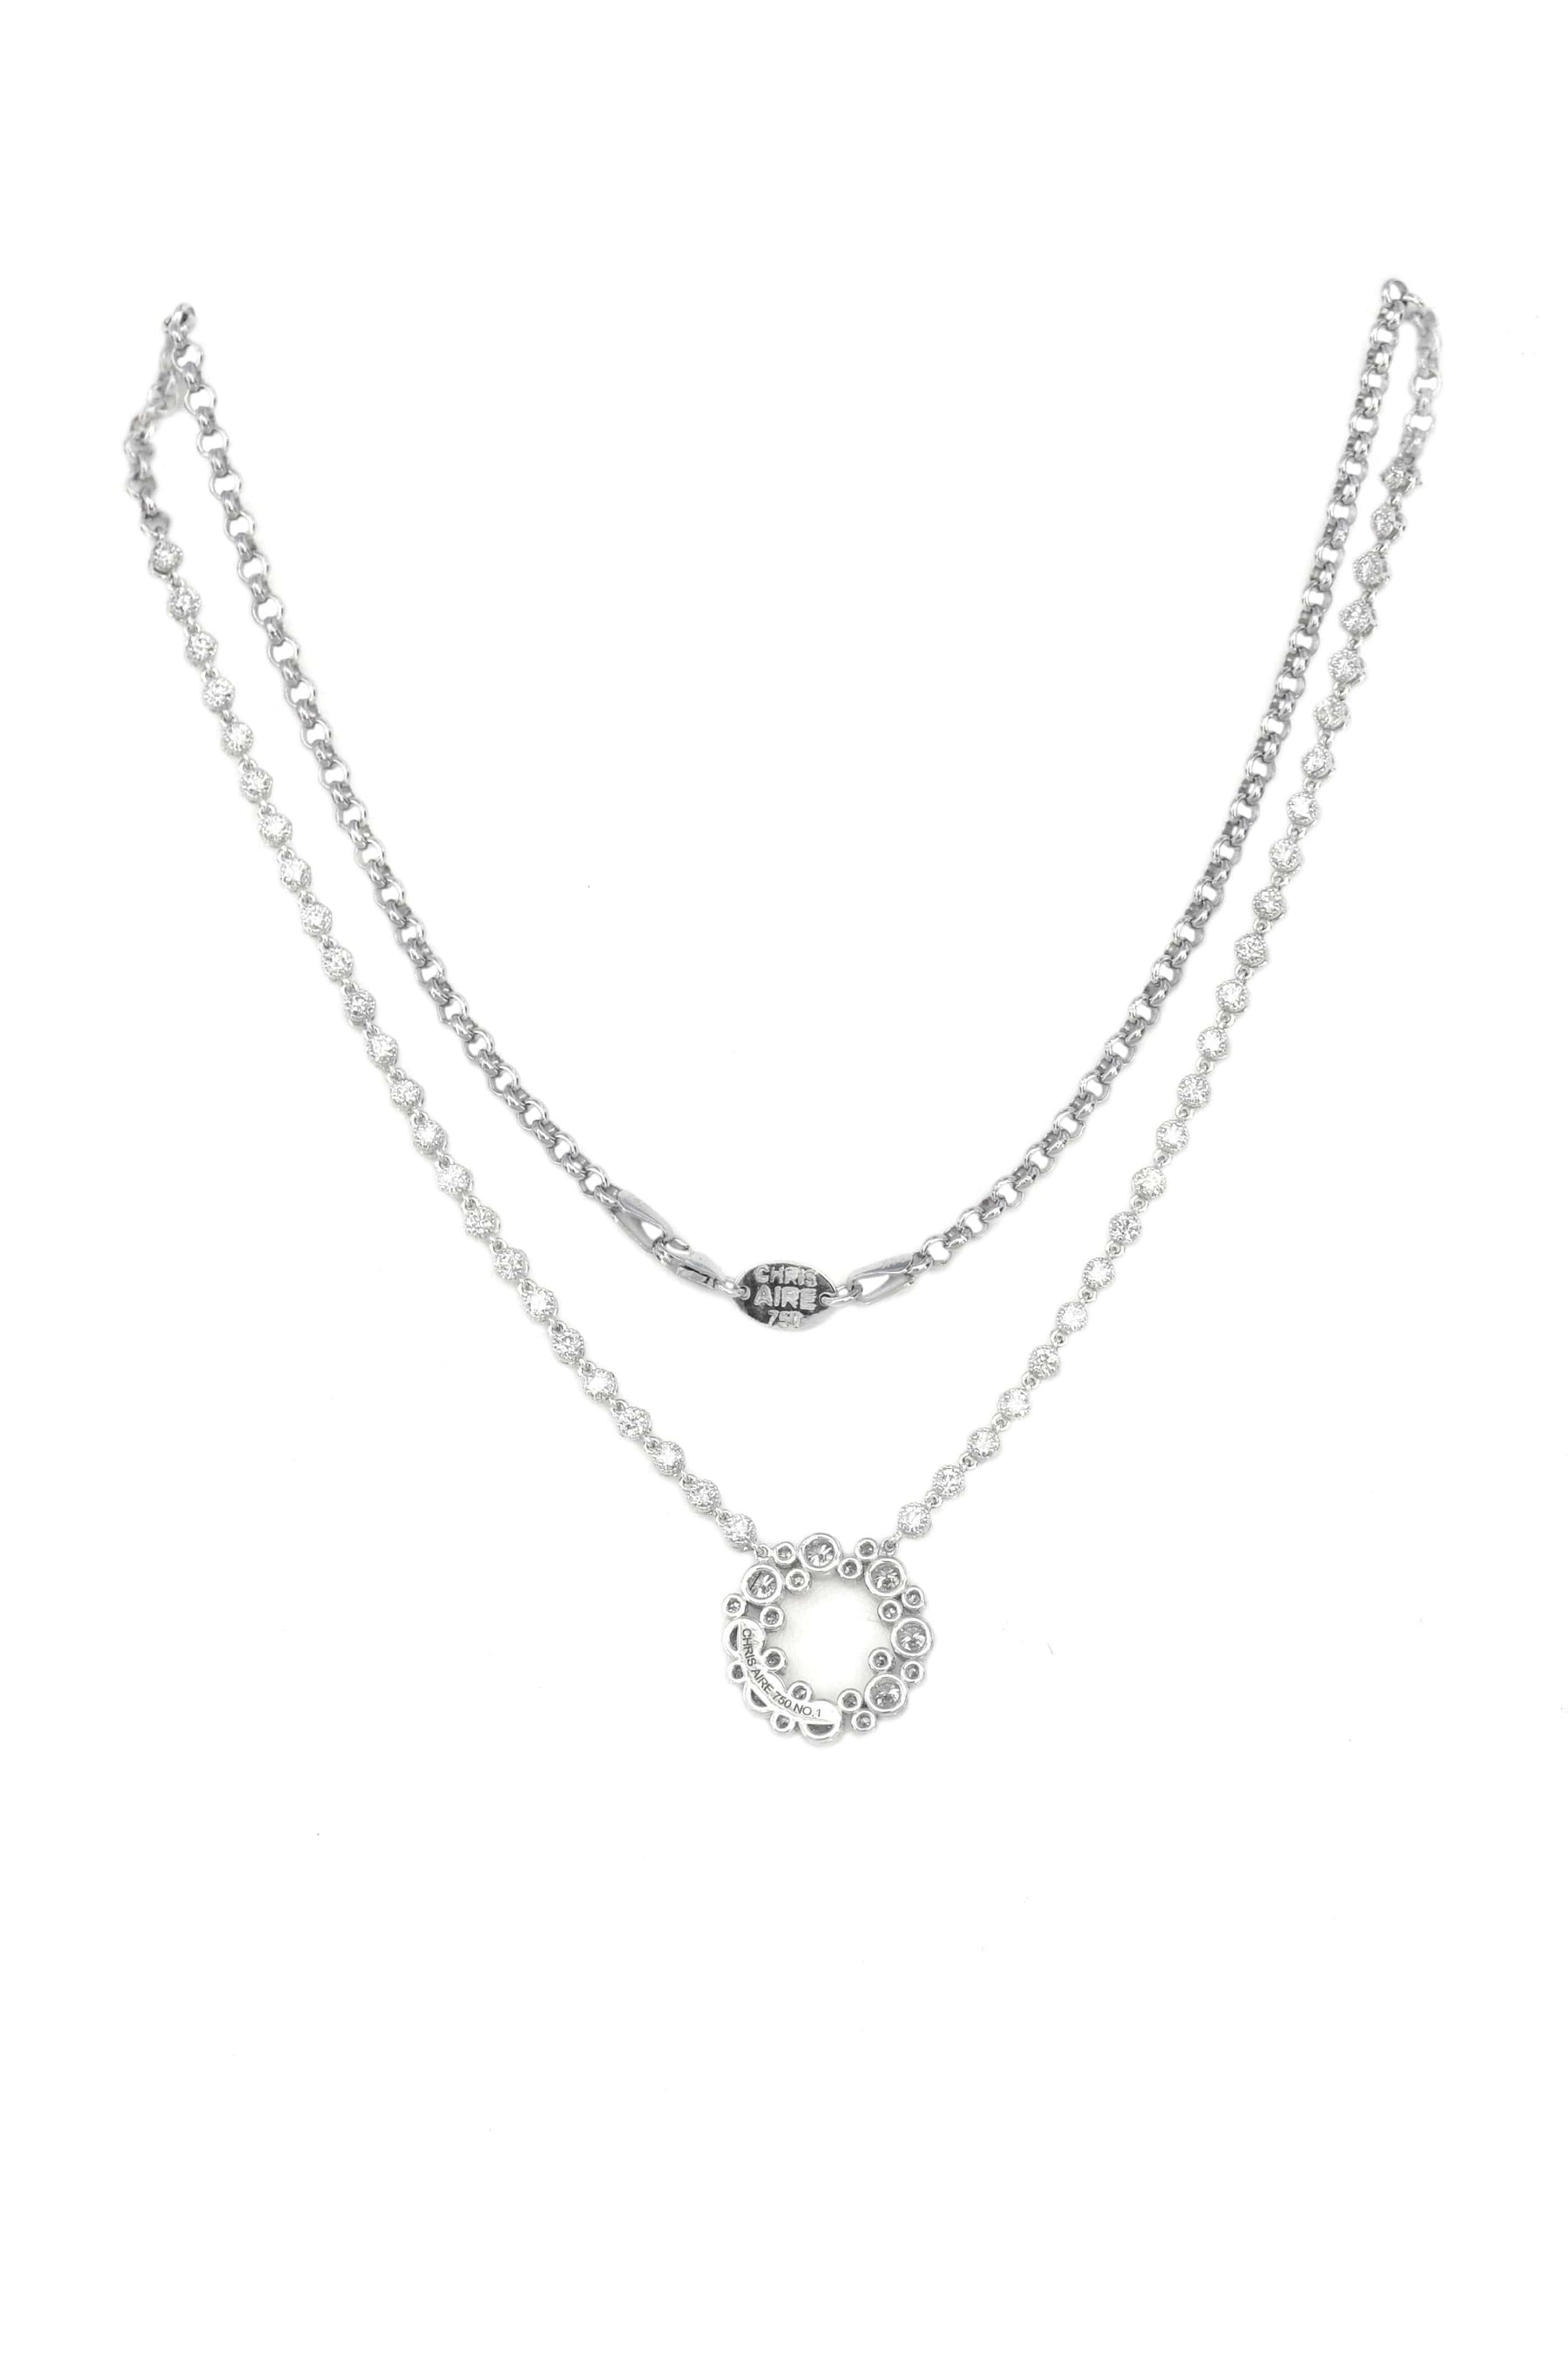 DIAMOND NECKLACE - CHRONICLE - Chris Aire Fine Jewelry & Timepieces